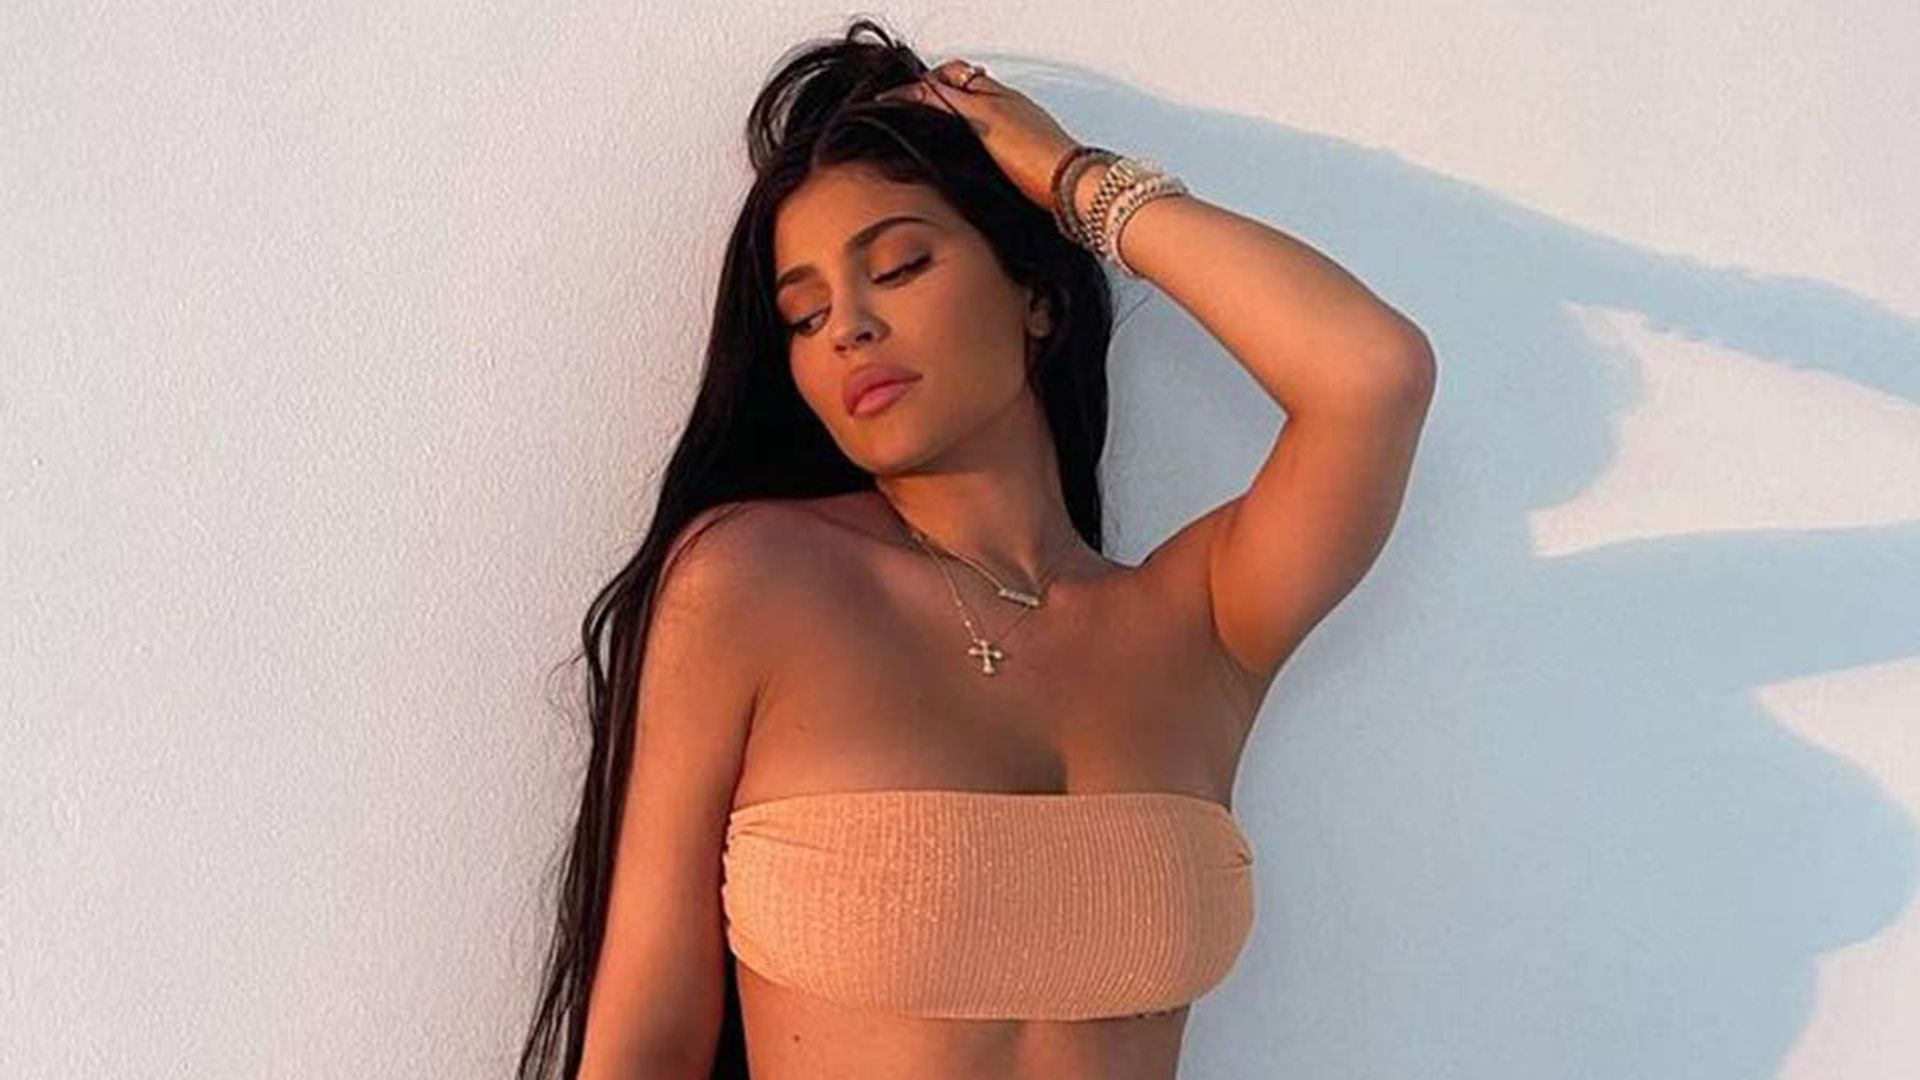 Kylie Jenner May Have Just Shared Her Most Revealing Bikini Yet